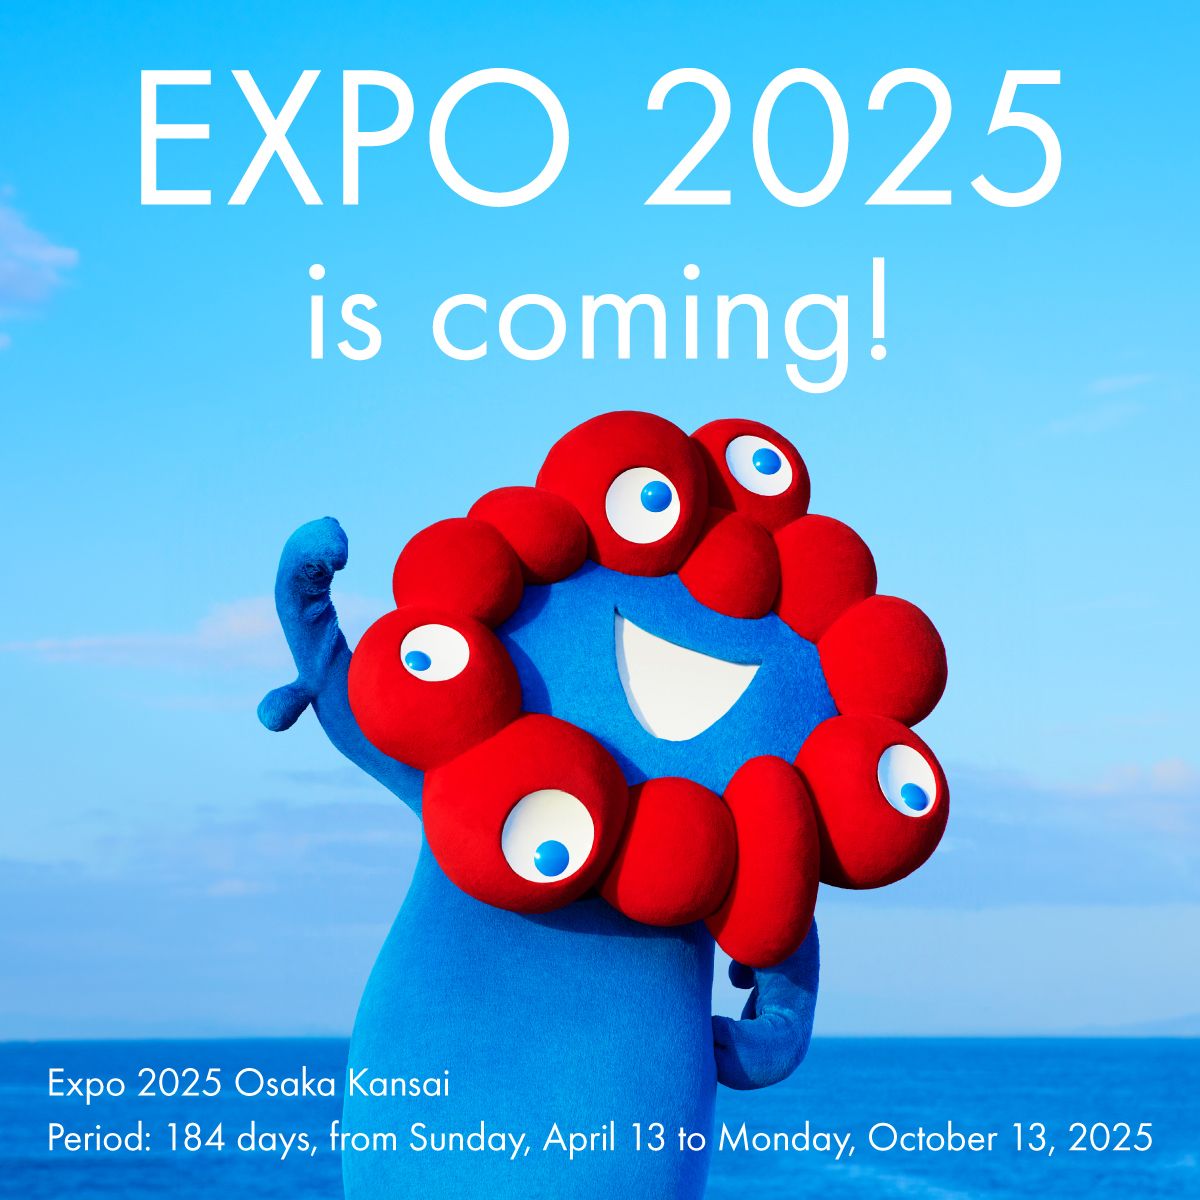 Kenya is gearing up to showcase her rich culture, environmental conservation efforts, technological advancements, and innovation at Expo 2025 Osaka Kansai, Japan. Kenya looks forward to engaging in meaningful exchanges, nurturing diplomatic ties, exploring trade opportunities,…